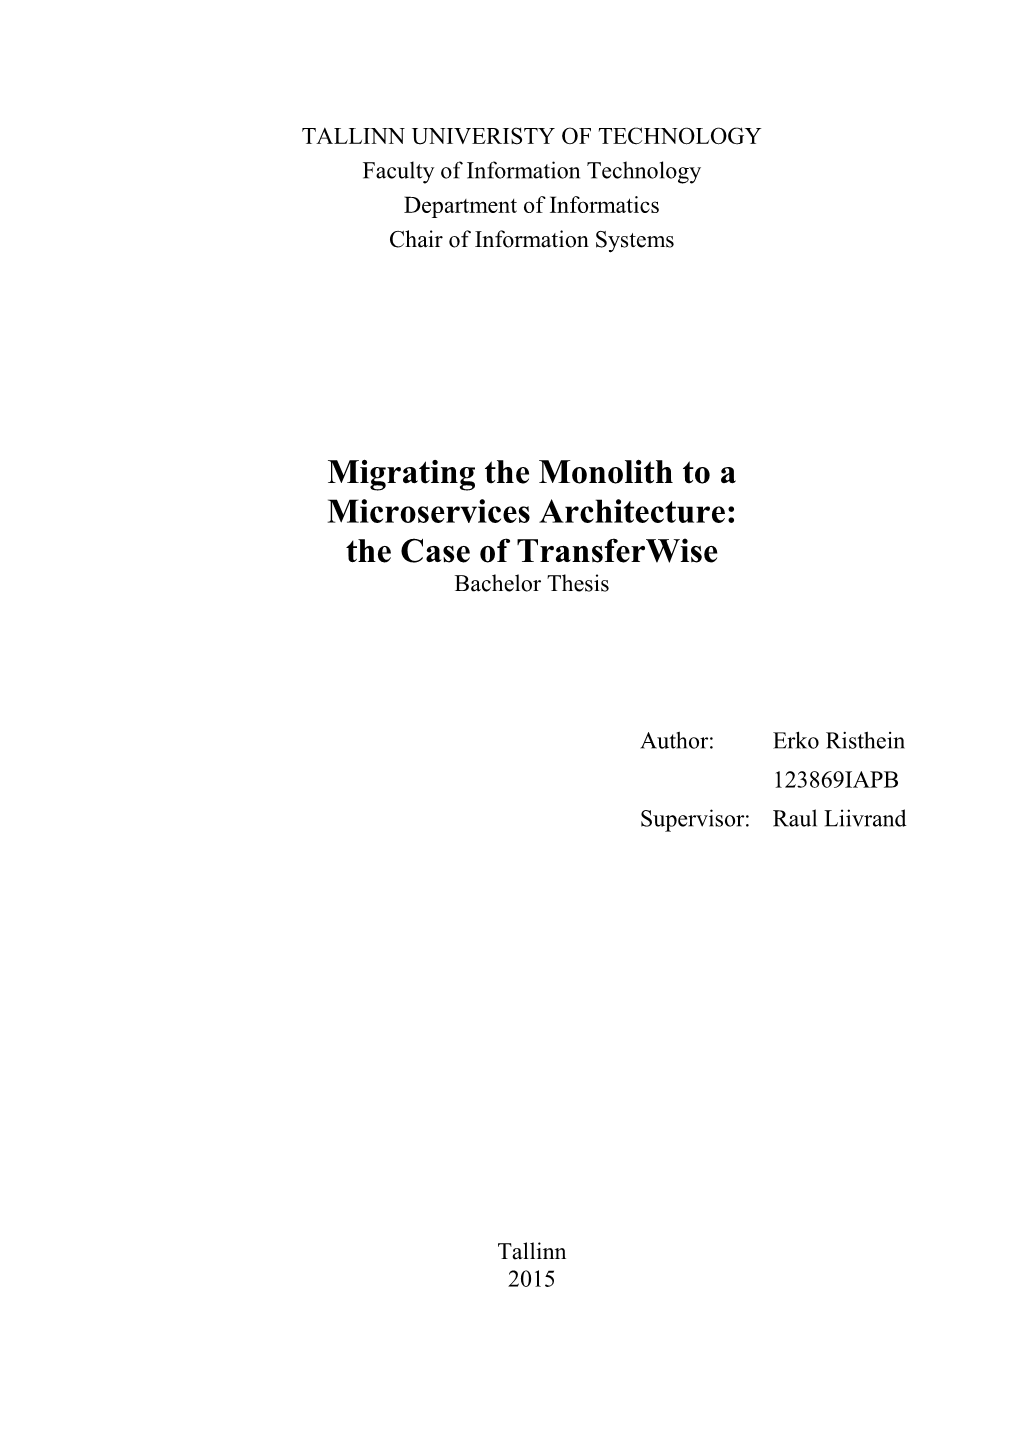 Migrating the Monolith to a Microservices Architecture: the Case of Transferwise Bachelor Thesis